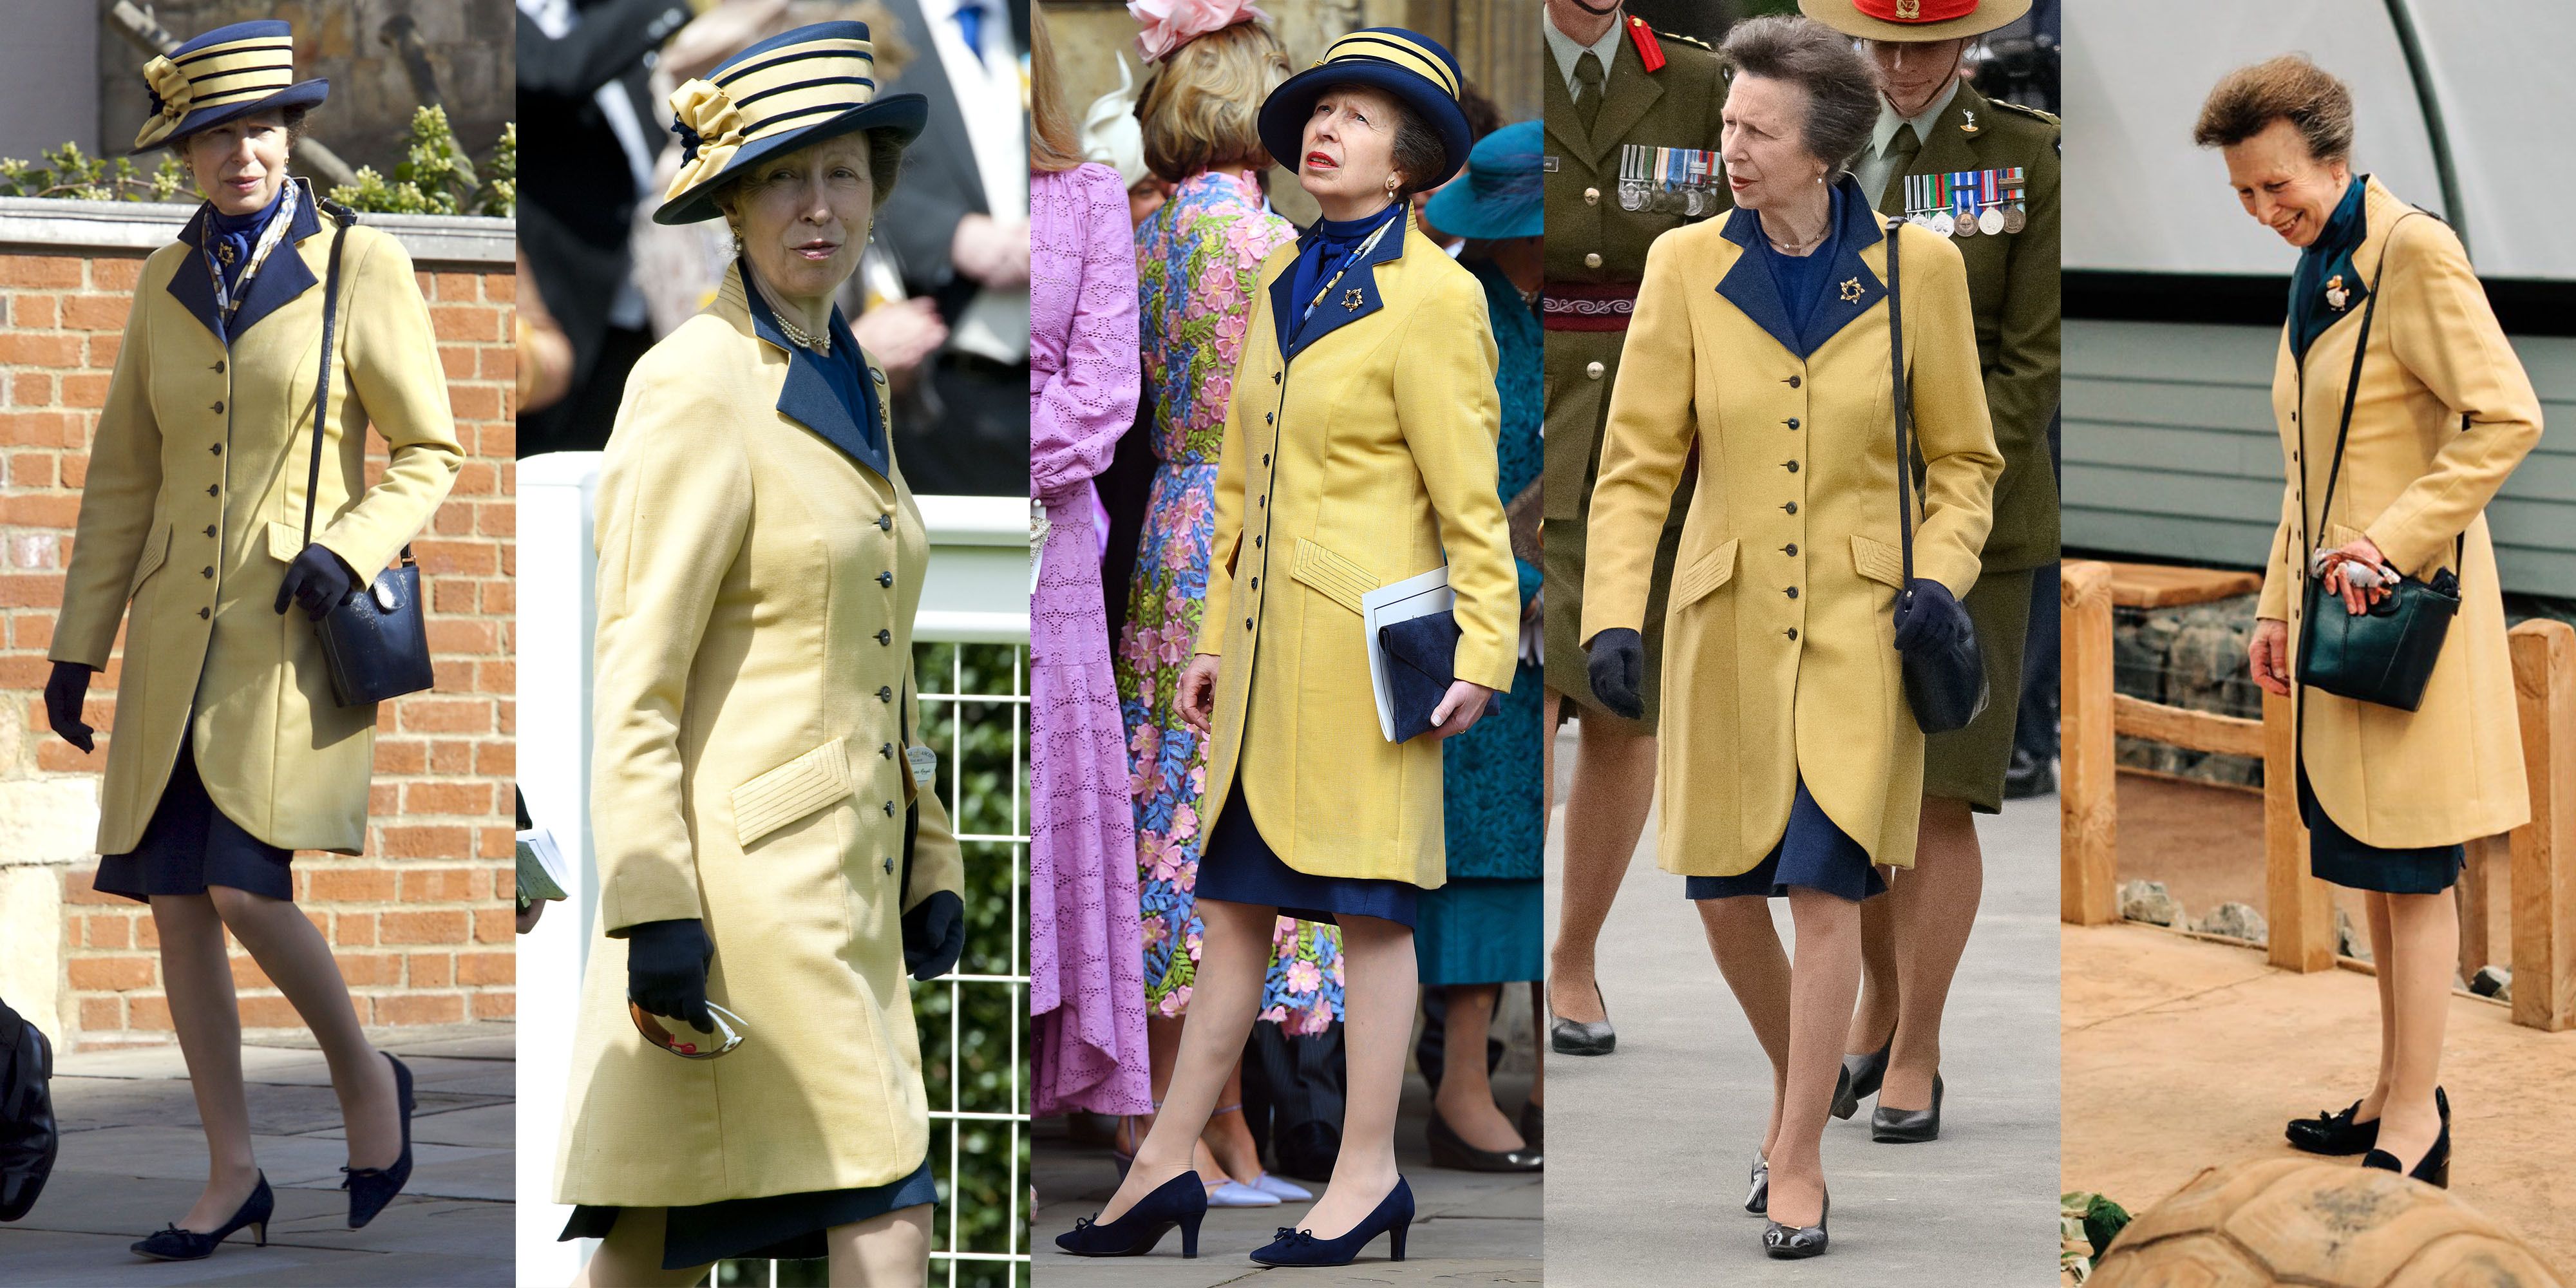 Kate Middleton Wears Cream Skirt Suit Out with Princess Anne